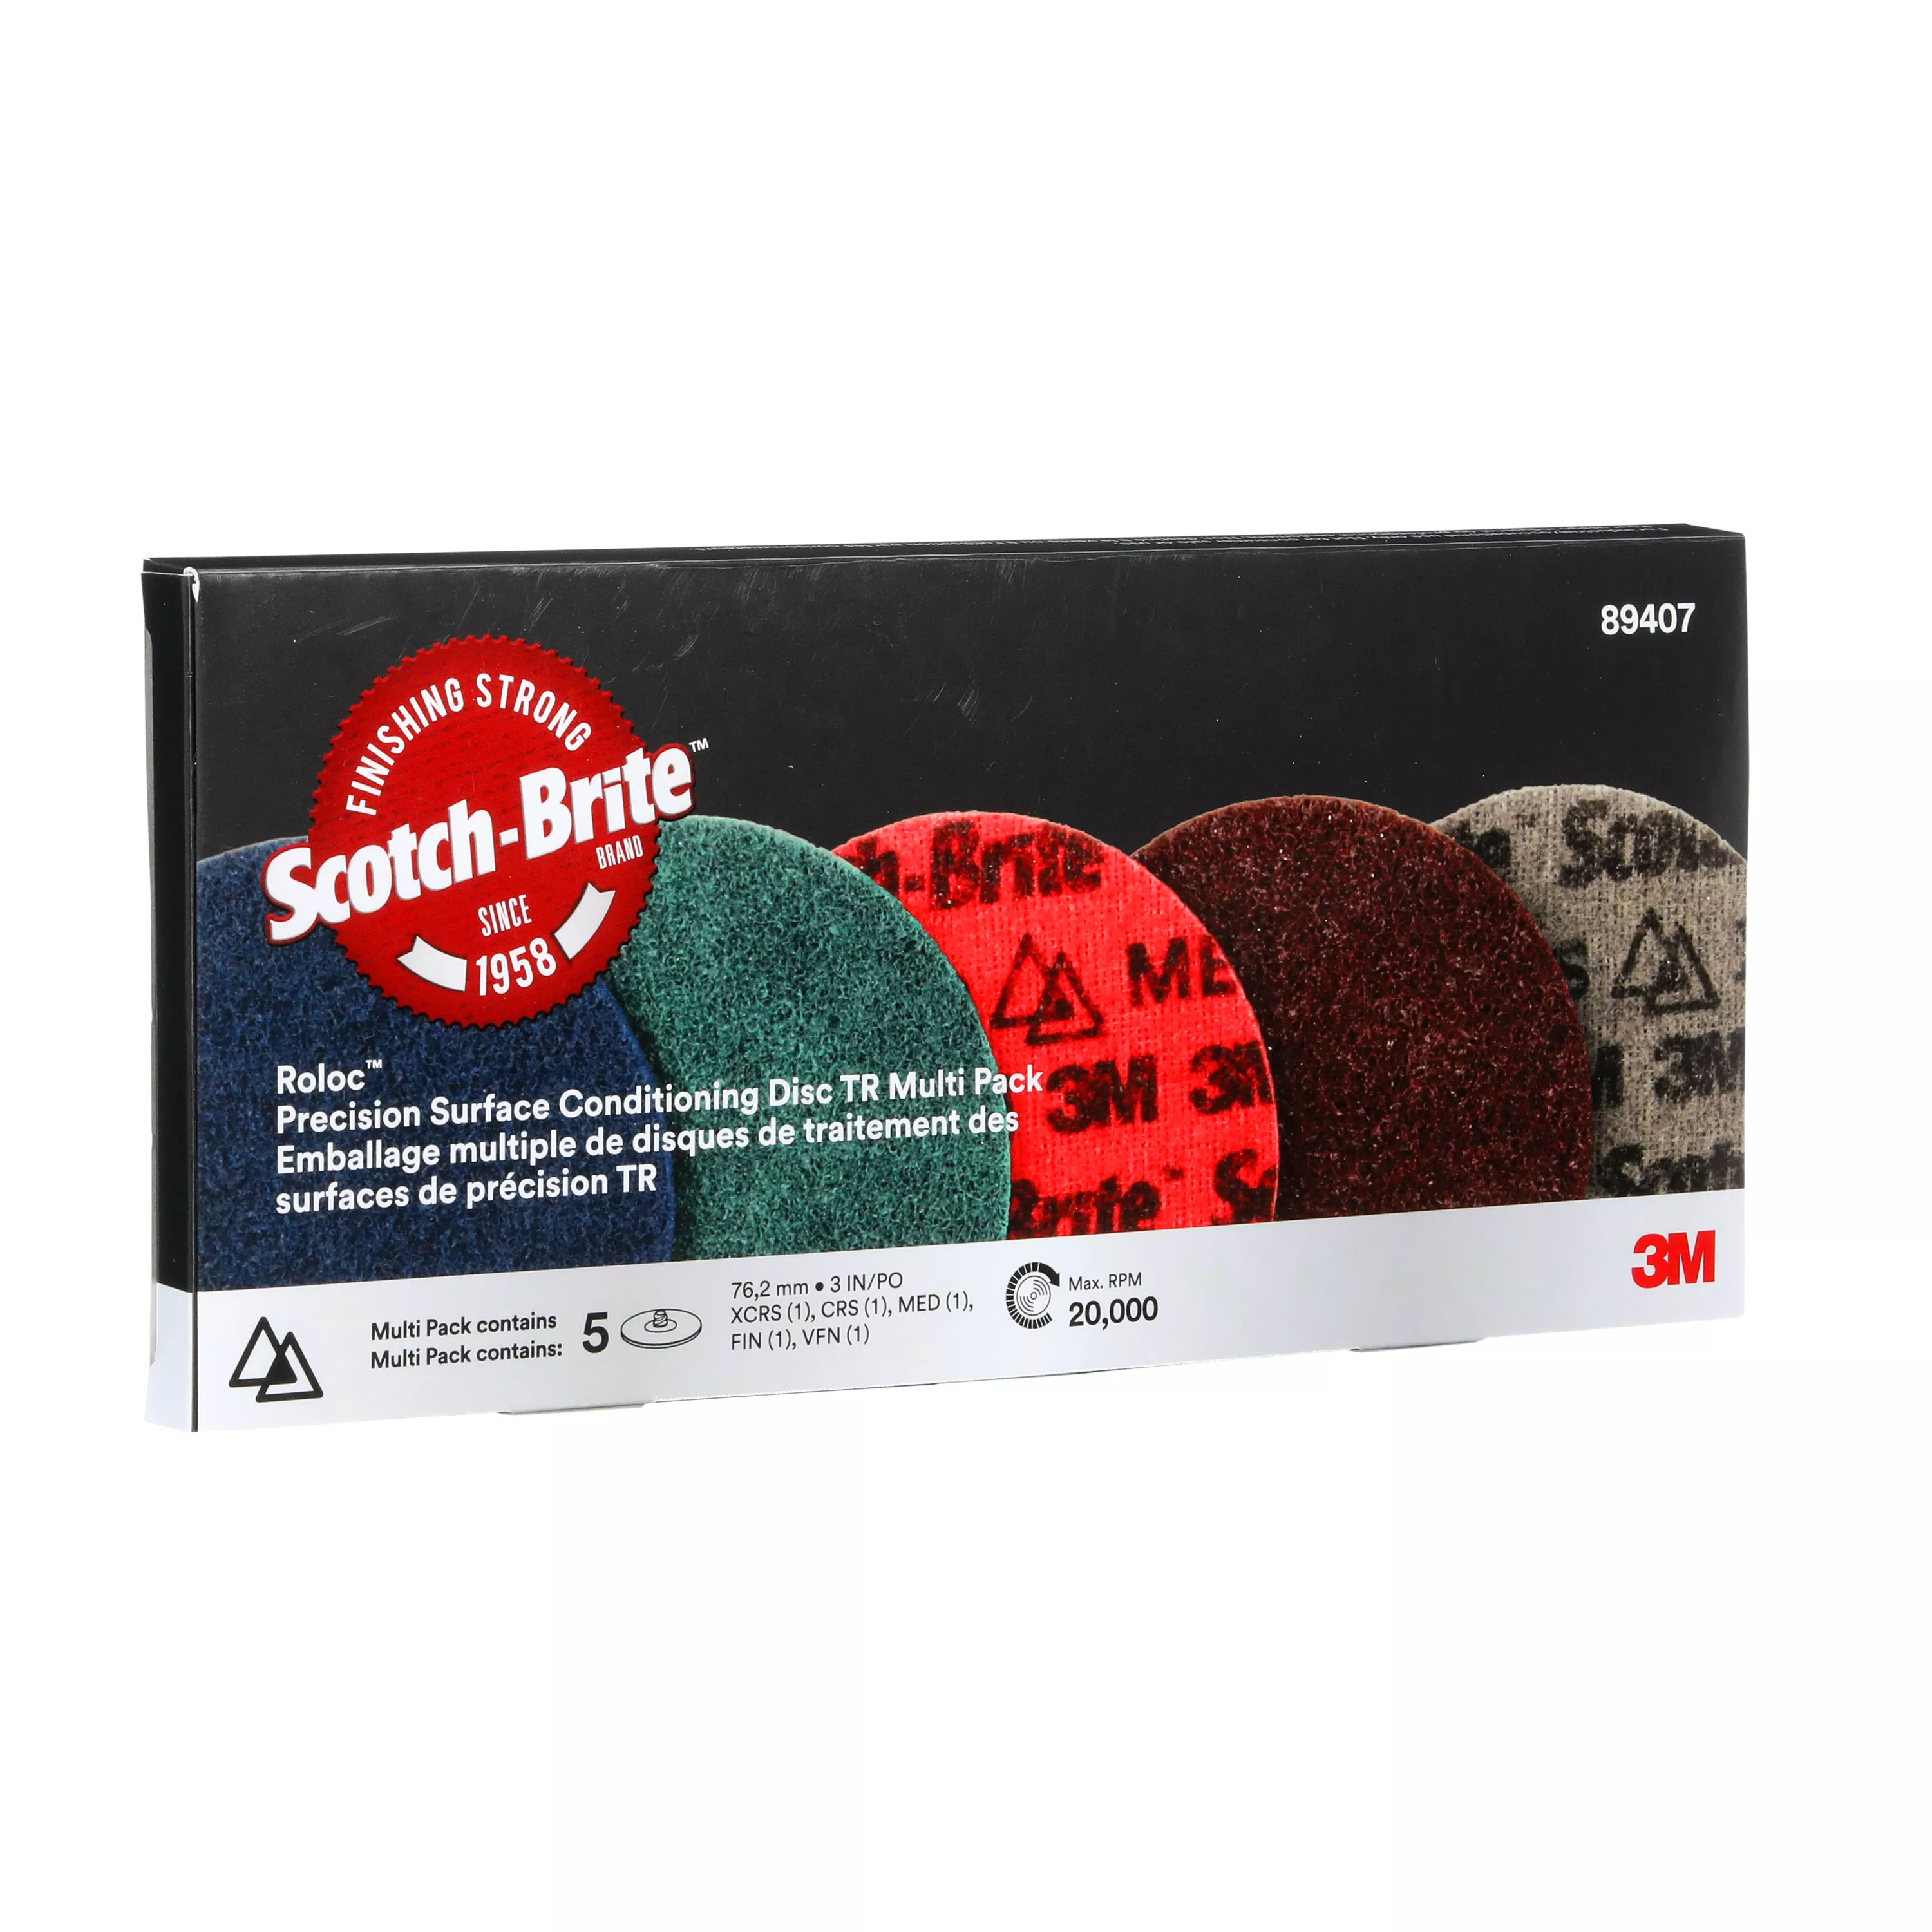 Product Number PN-DR | Scotch-Brite™ Roloc™ Precision Surface Conditioning Disc